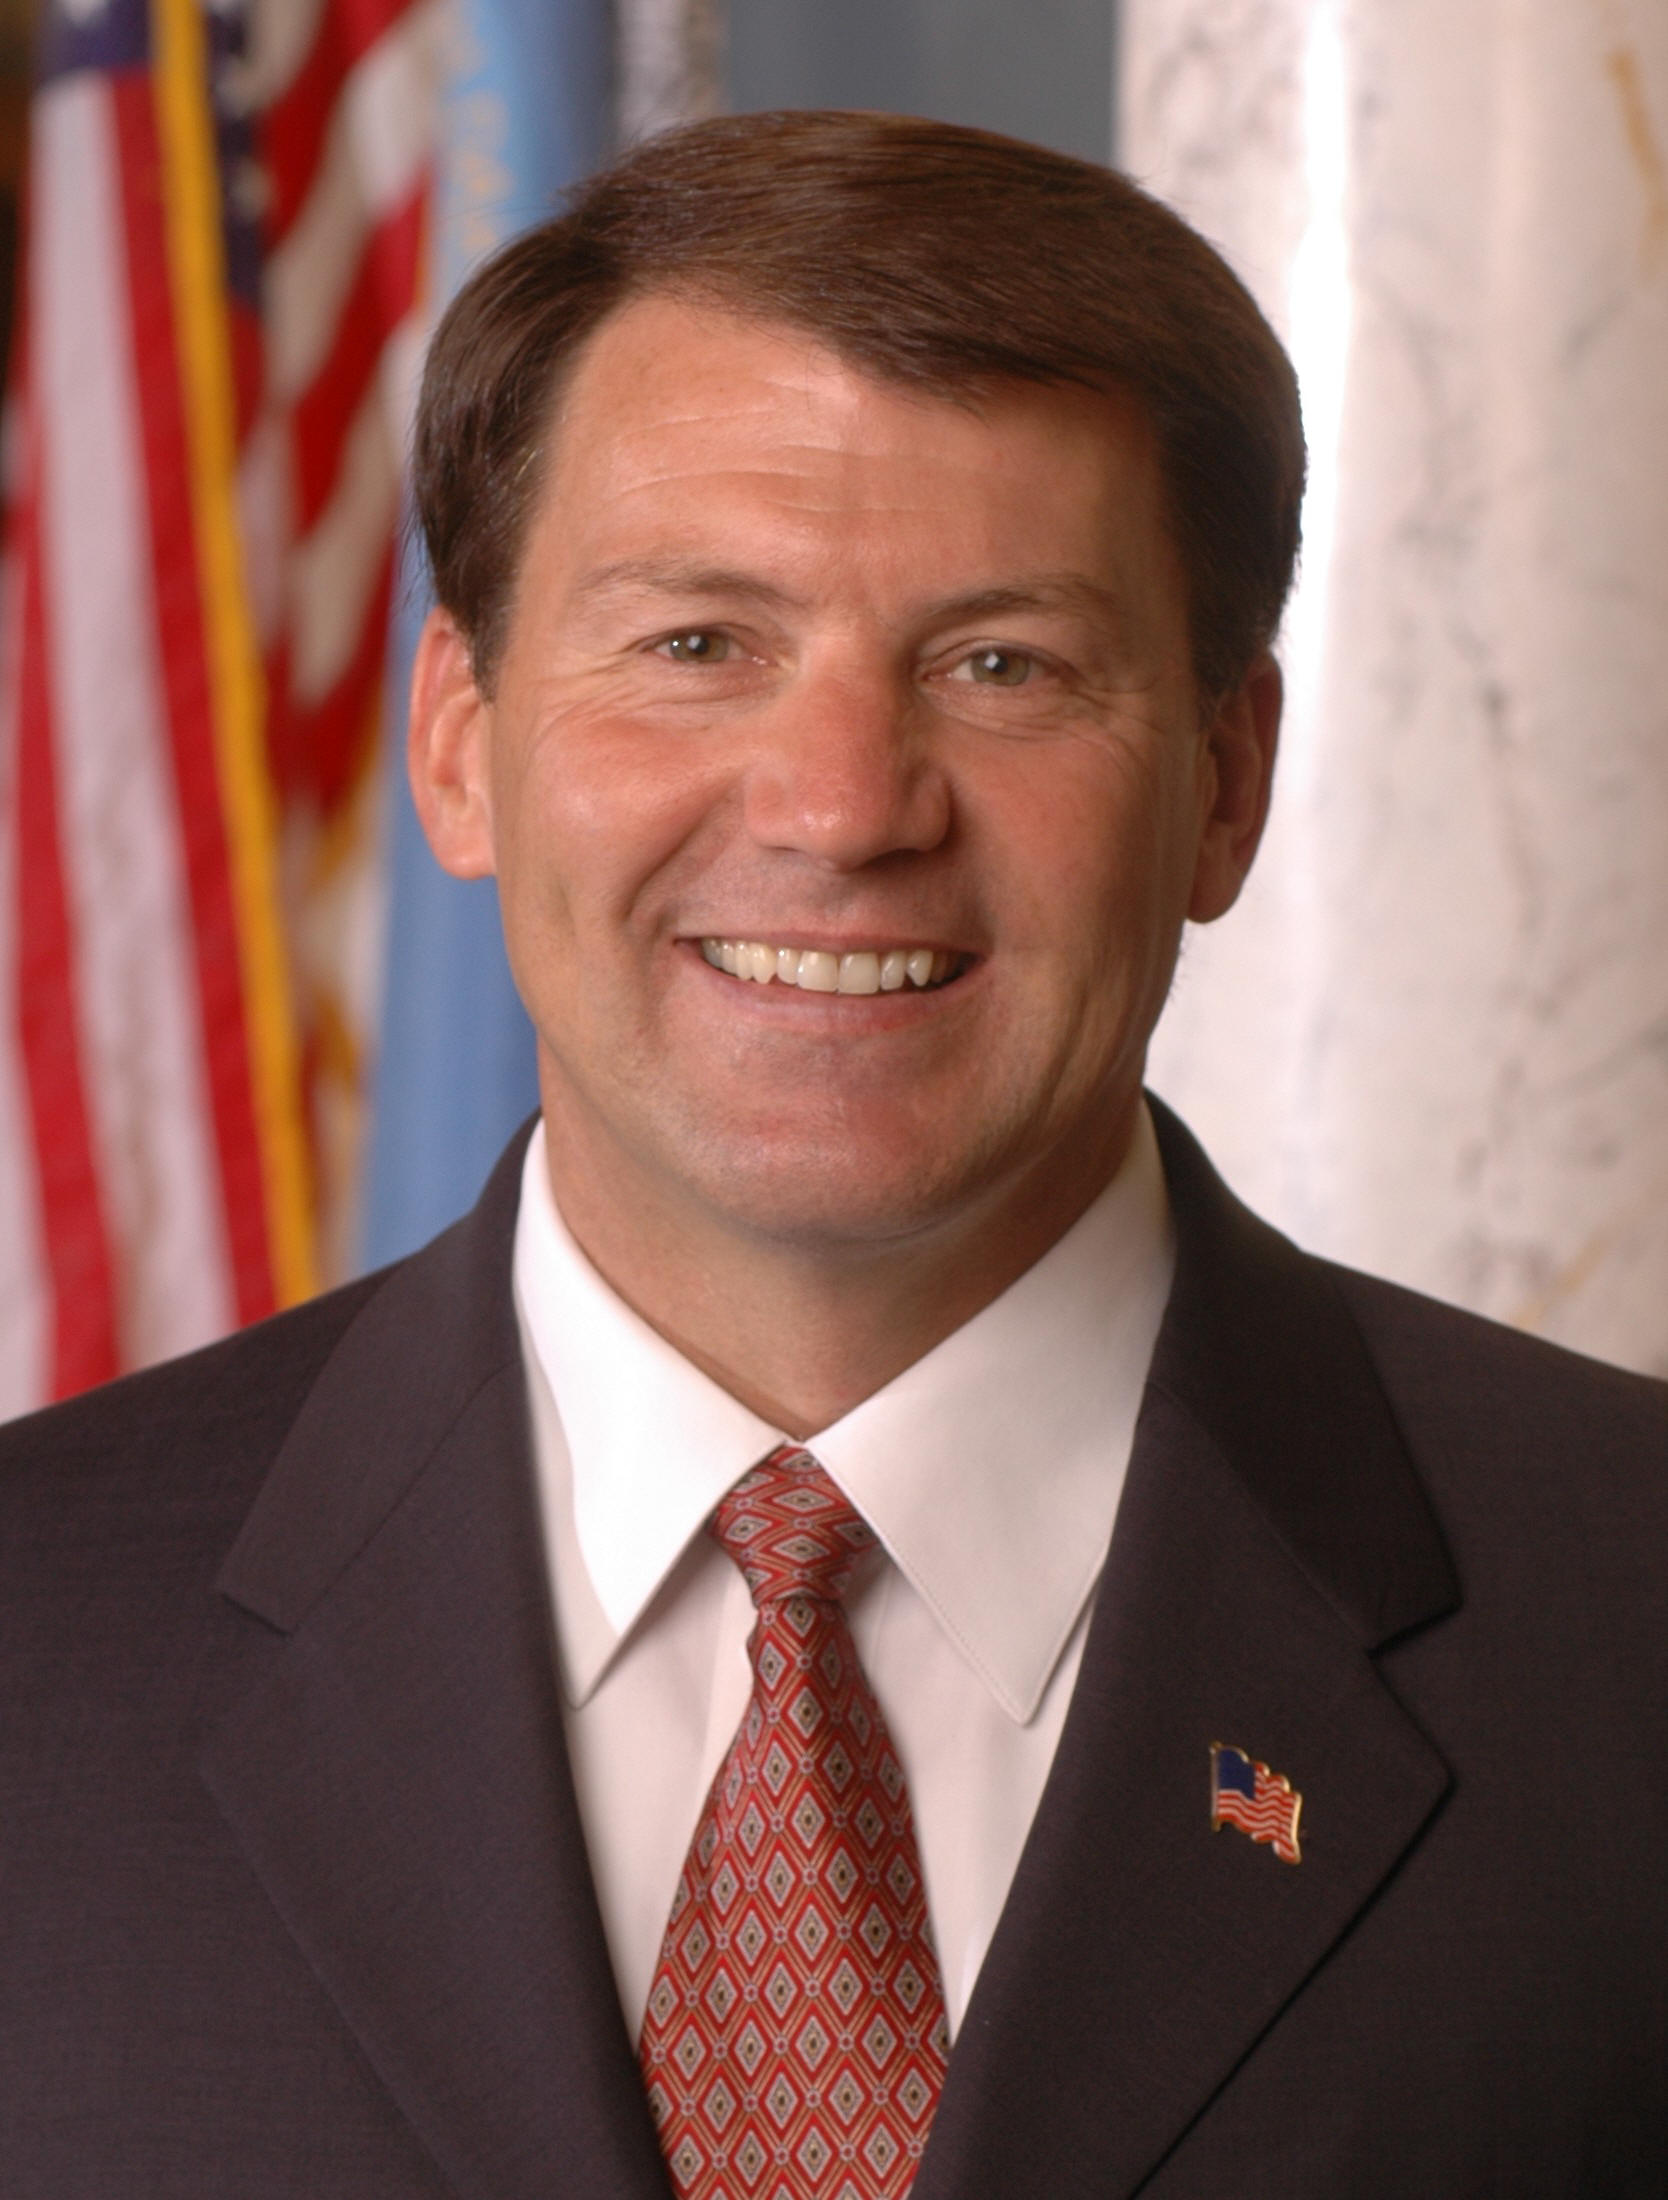 Gov. Mike Rounds: Federal government needs to be reined in